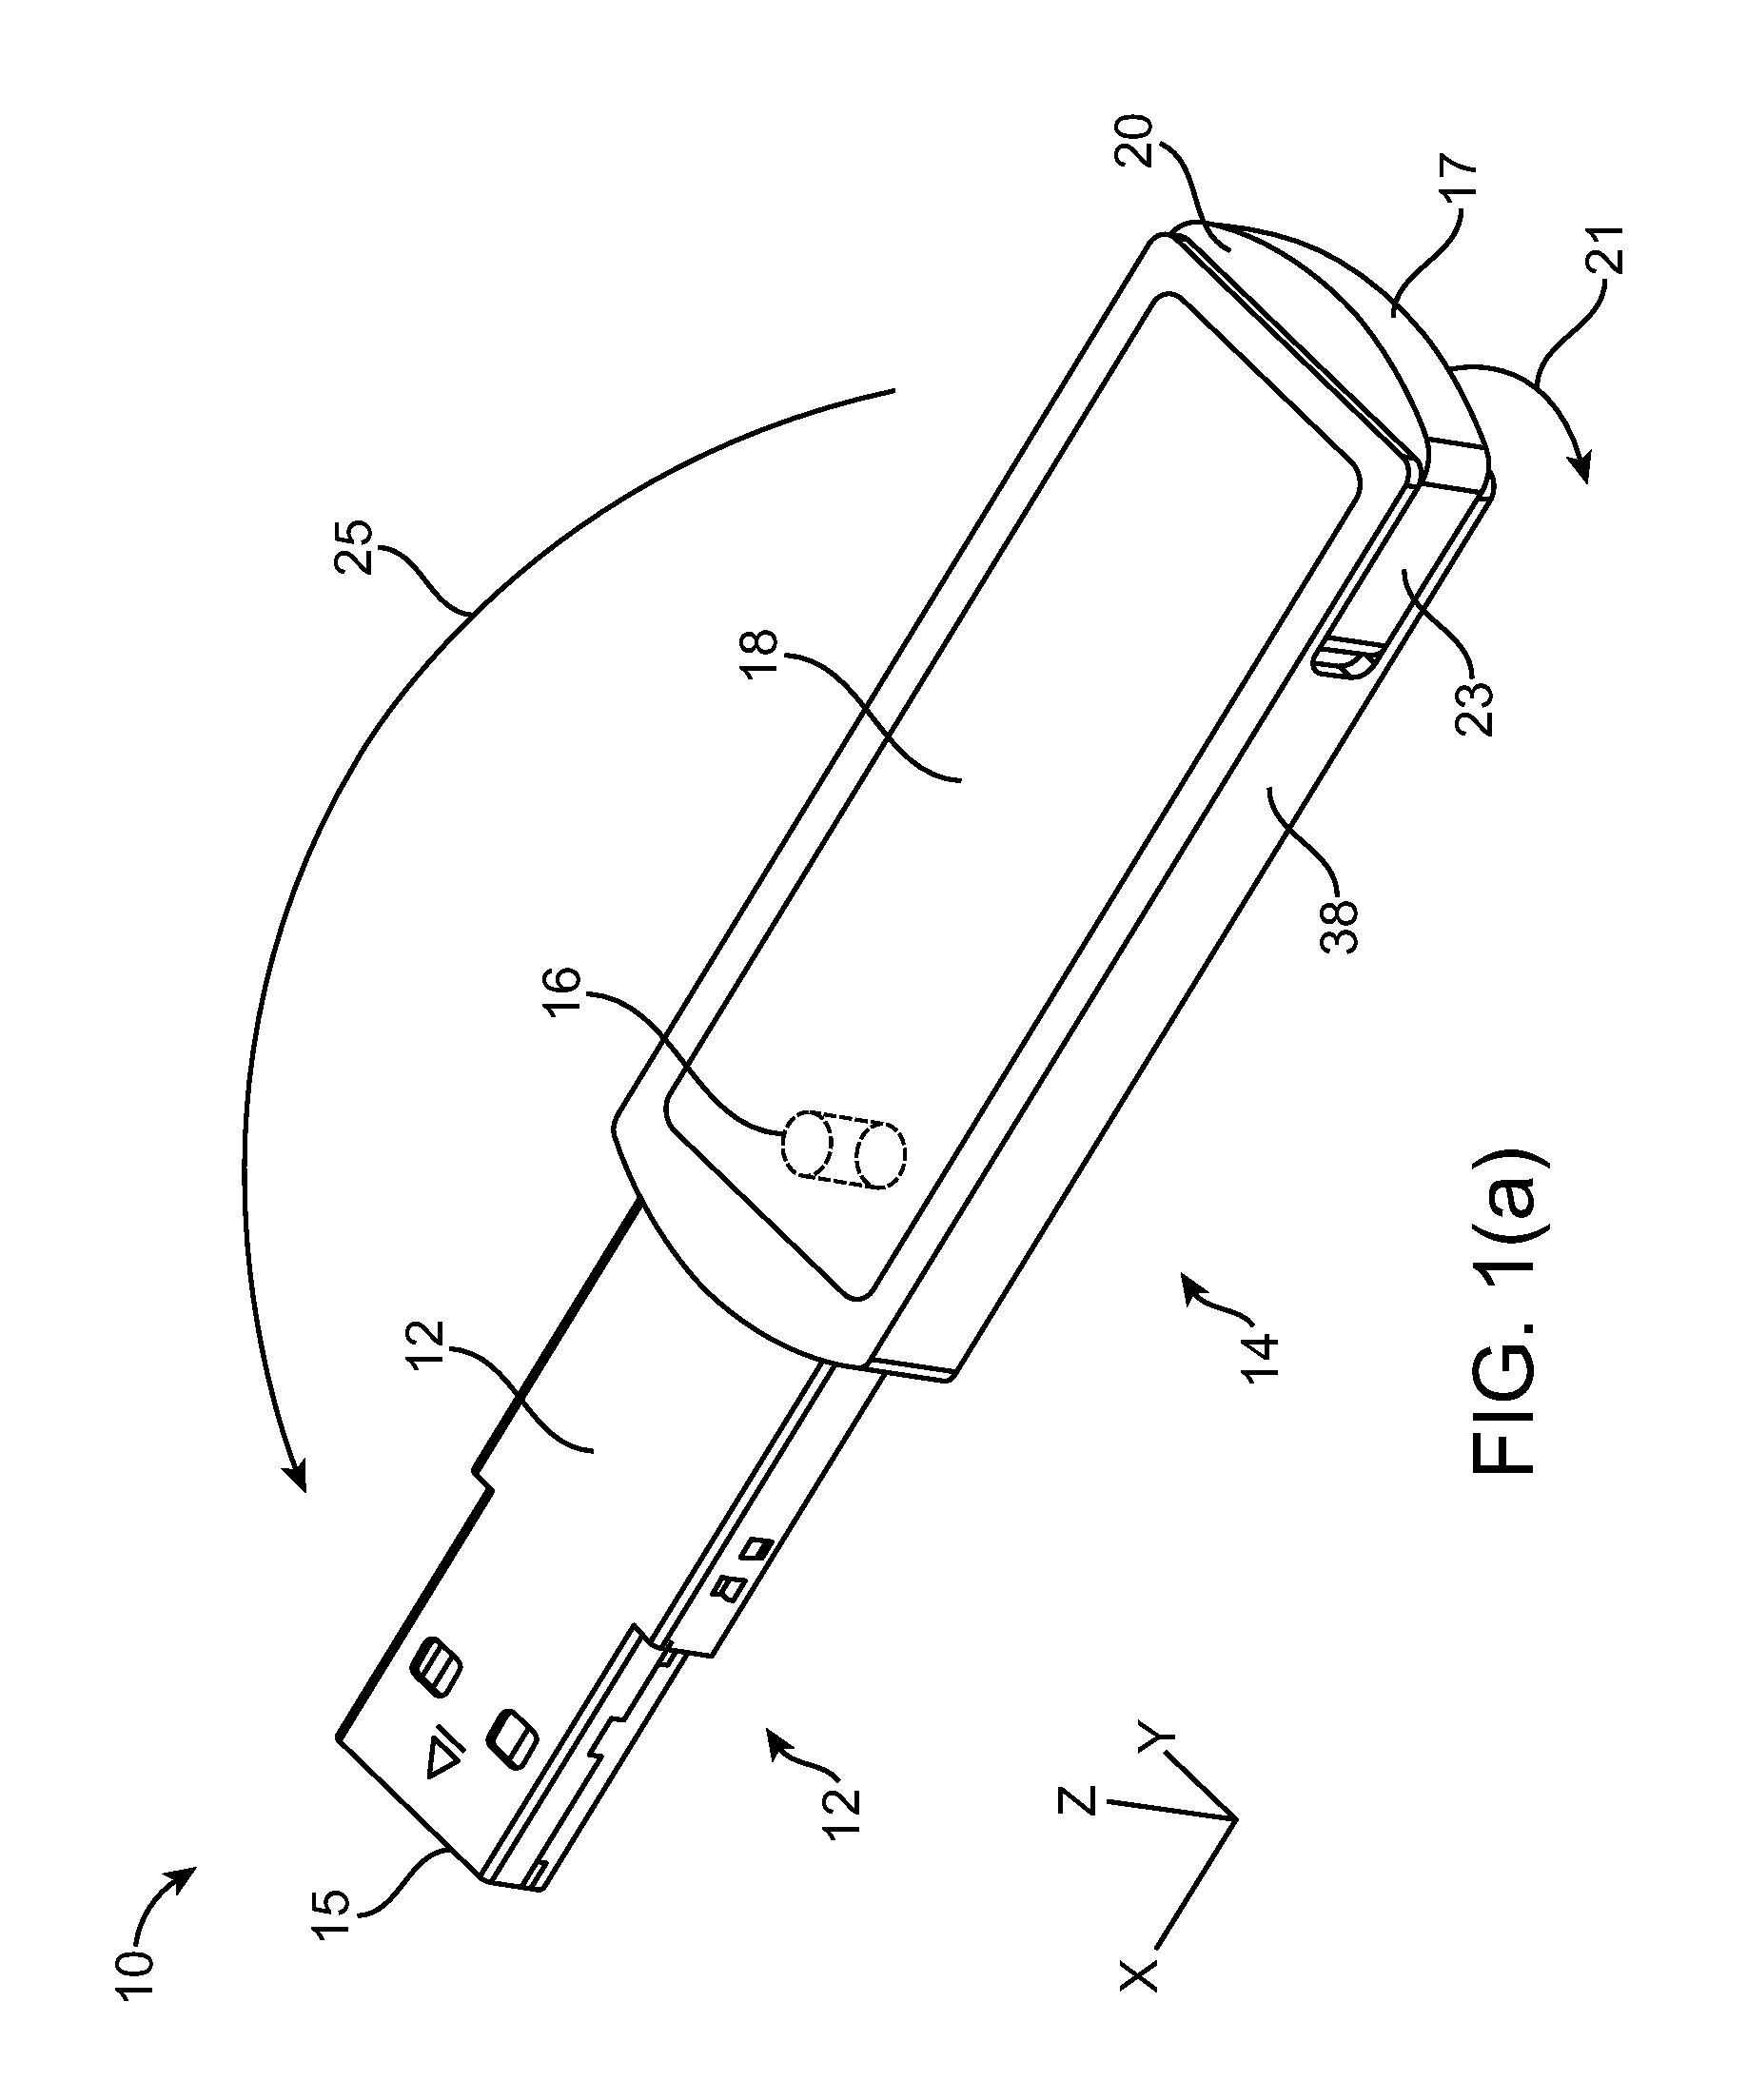 Universal serial bus (USB) flash drive housing a slim USB device and having swivel cap functionalities allowing for two locking positions